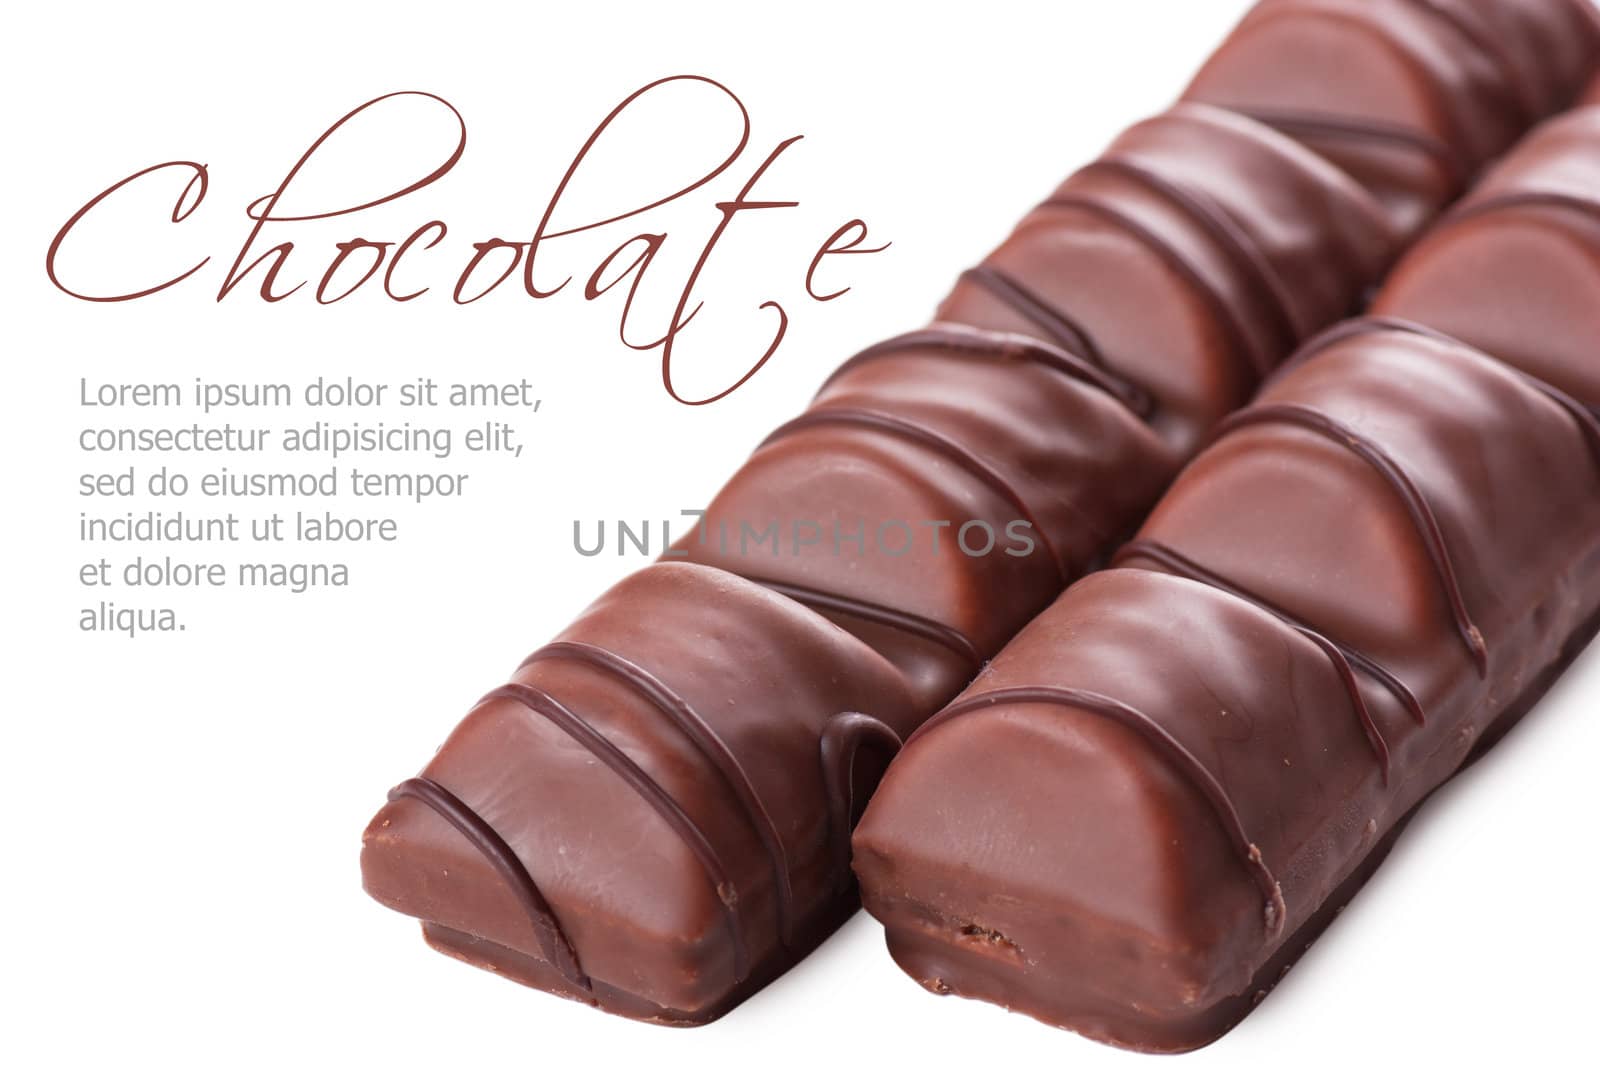 Closeup view of chocolate bar over white background